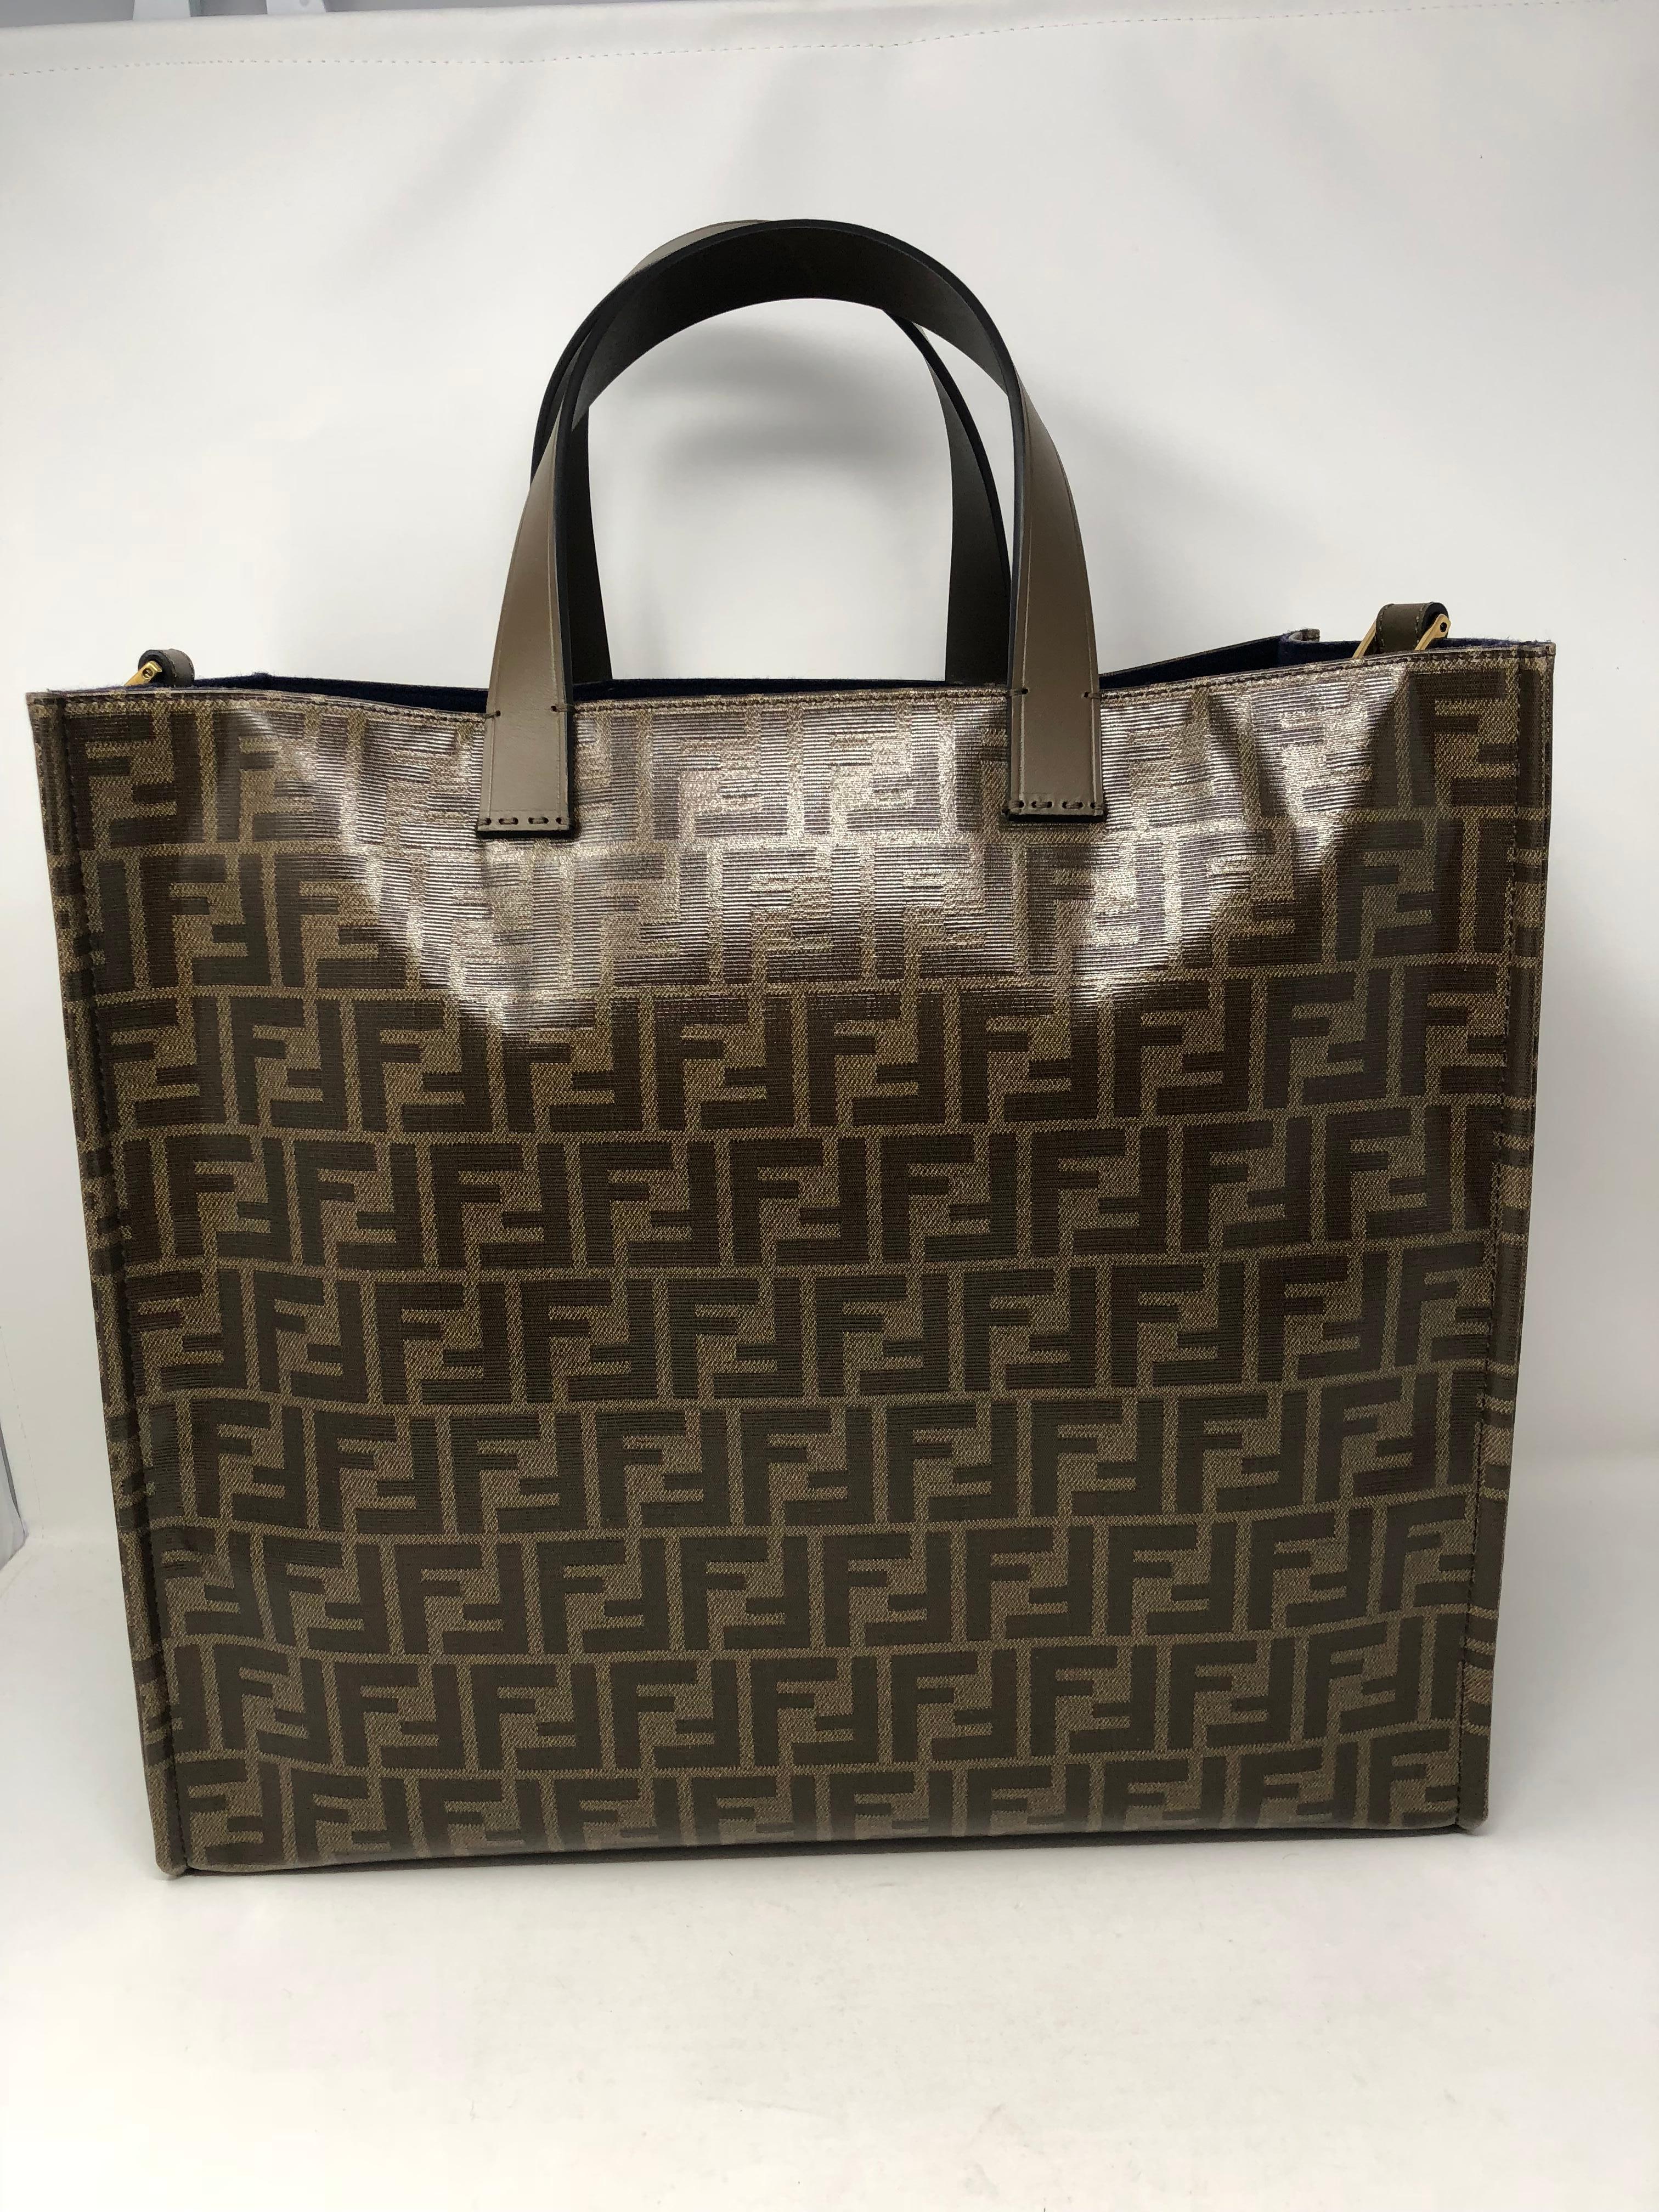 Fendi Runway Collection Large Tote bag in FF embossed canvas and leather. Fila and Fendi Collaboration makes this a very unique and limited item. Very roomy interior. Brand New and never used. This one is available now. Guaranteed authentic. 